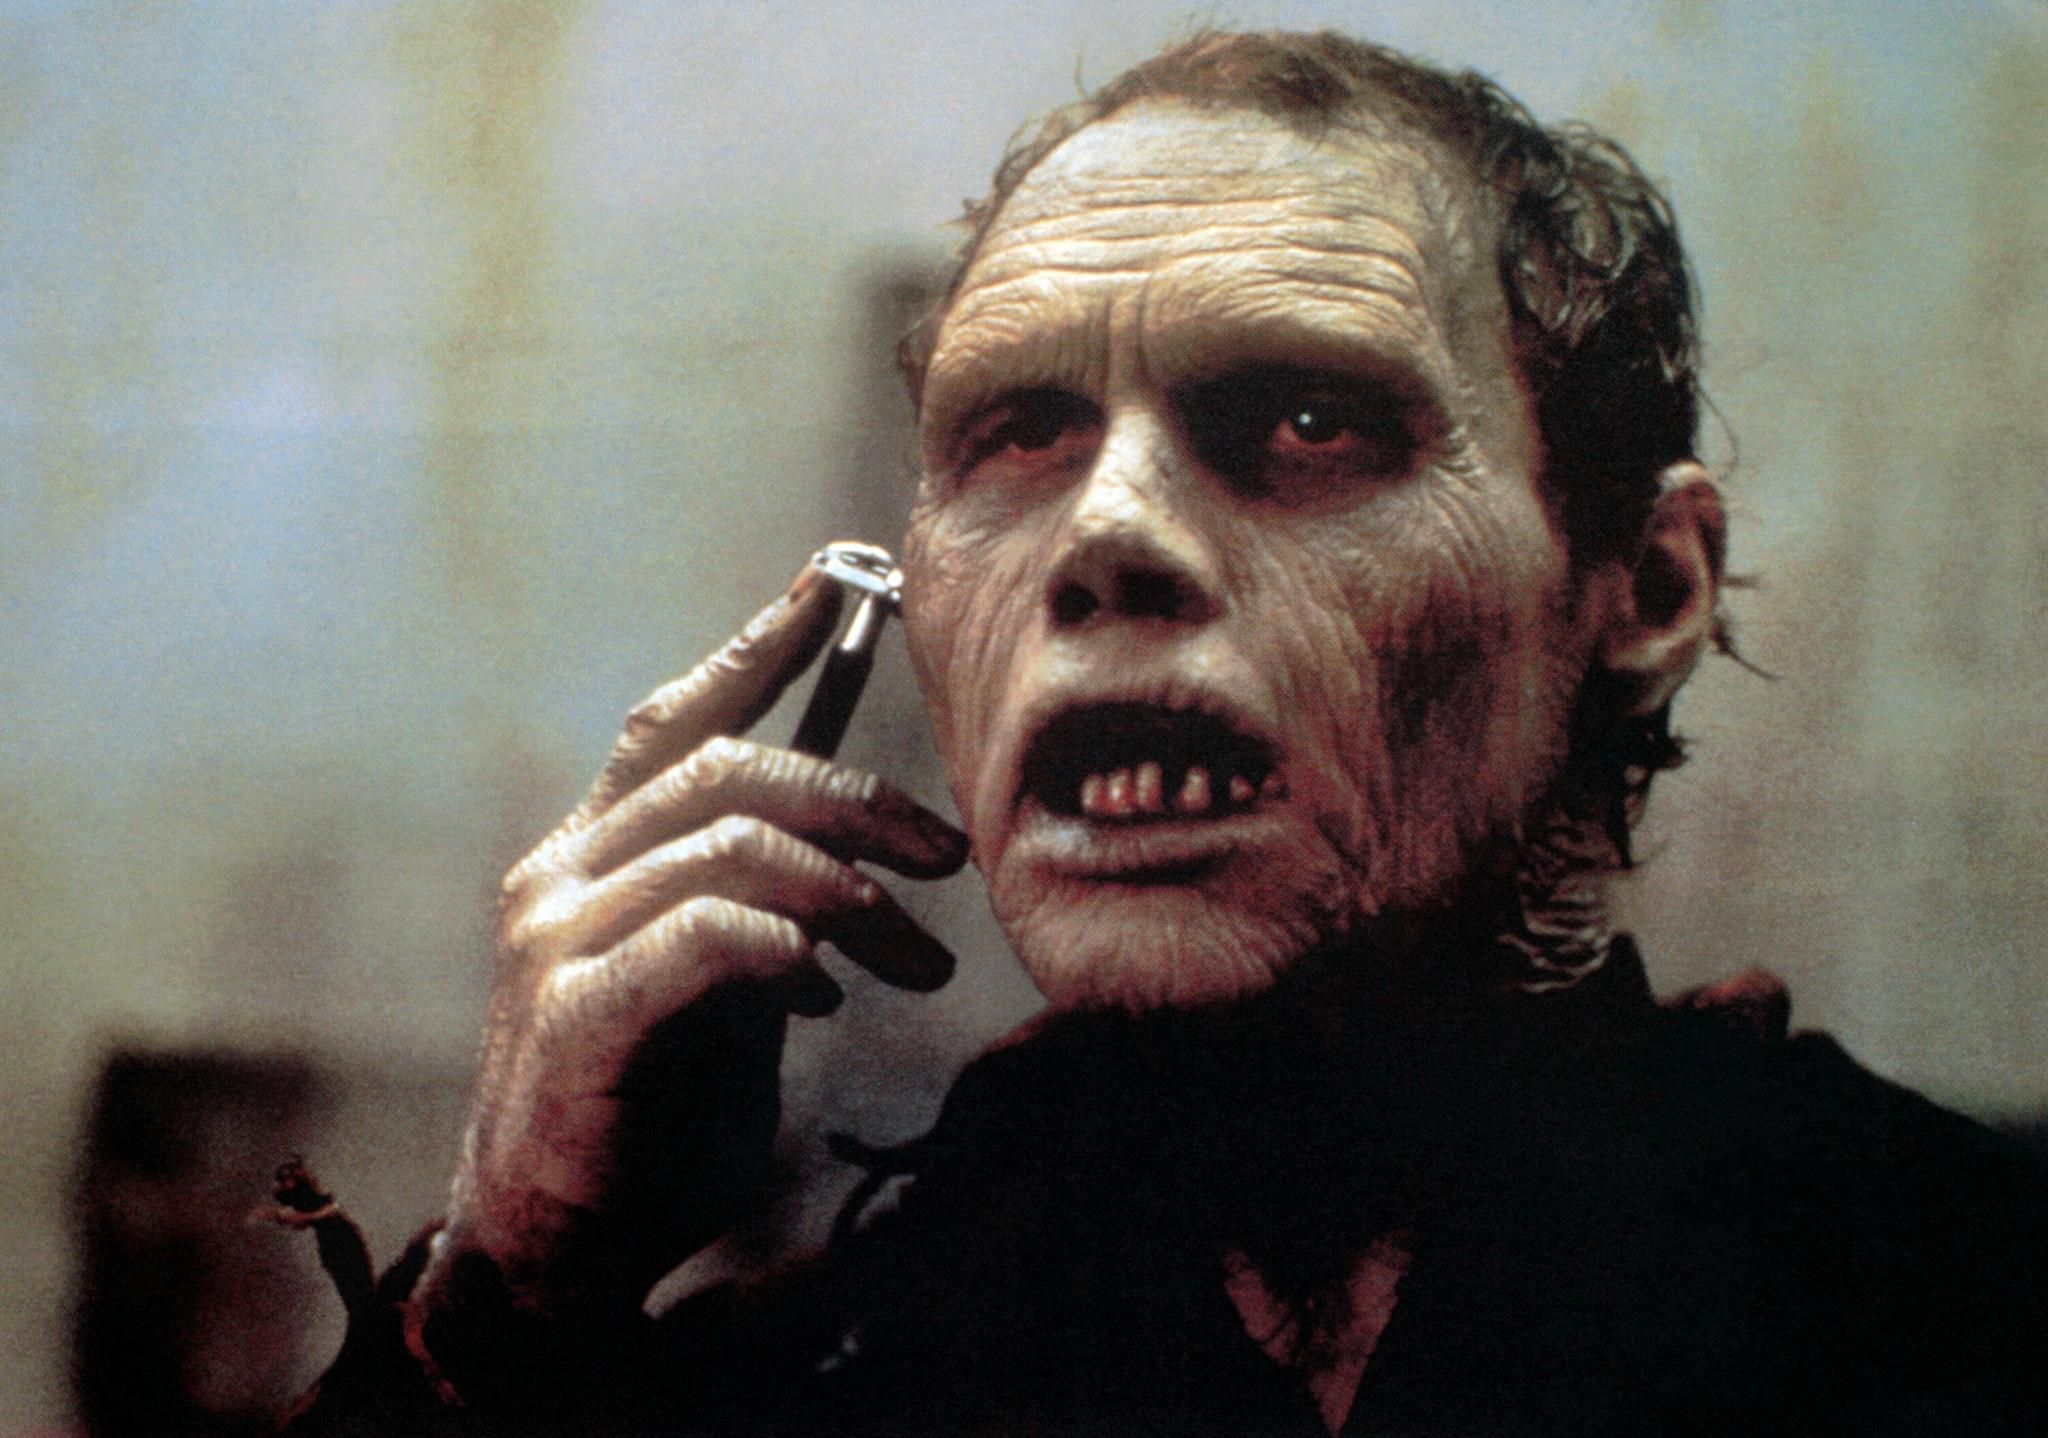 Howard Sherman as the zombie Bub in Day of the Dead (1985)